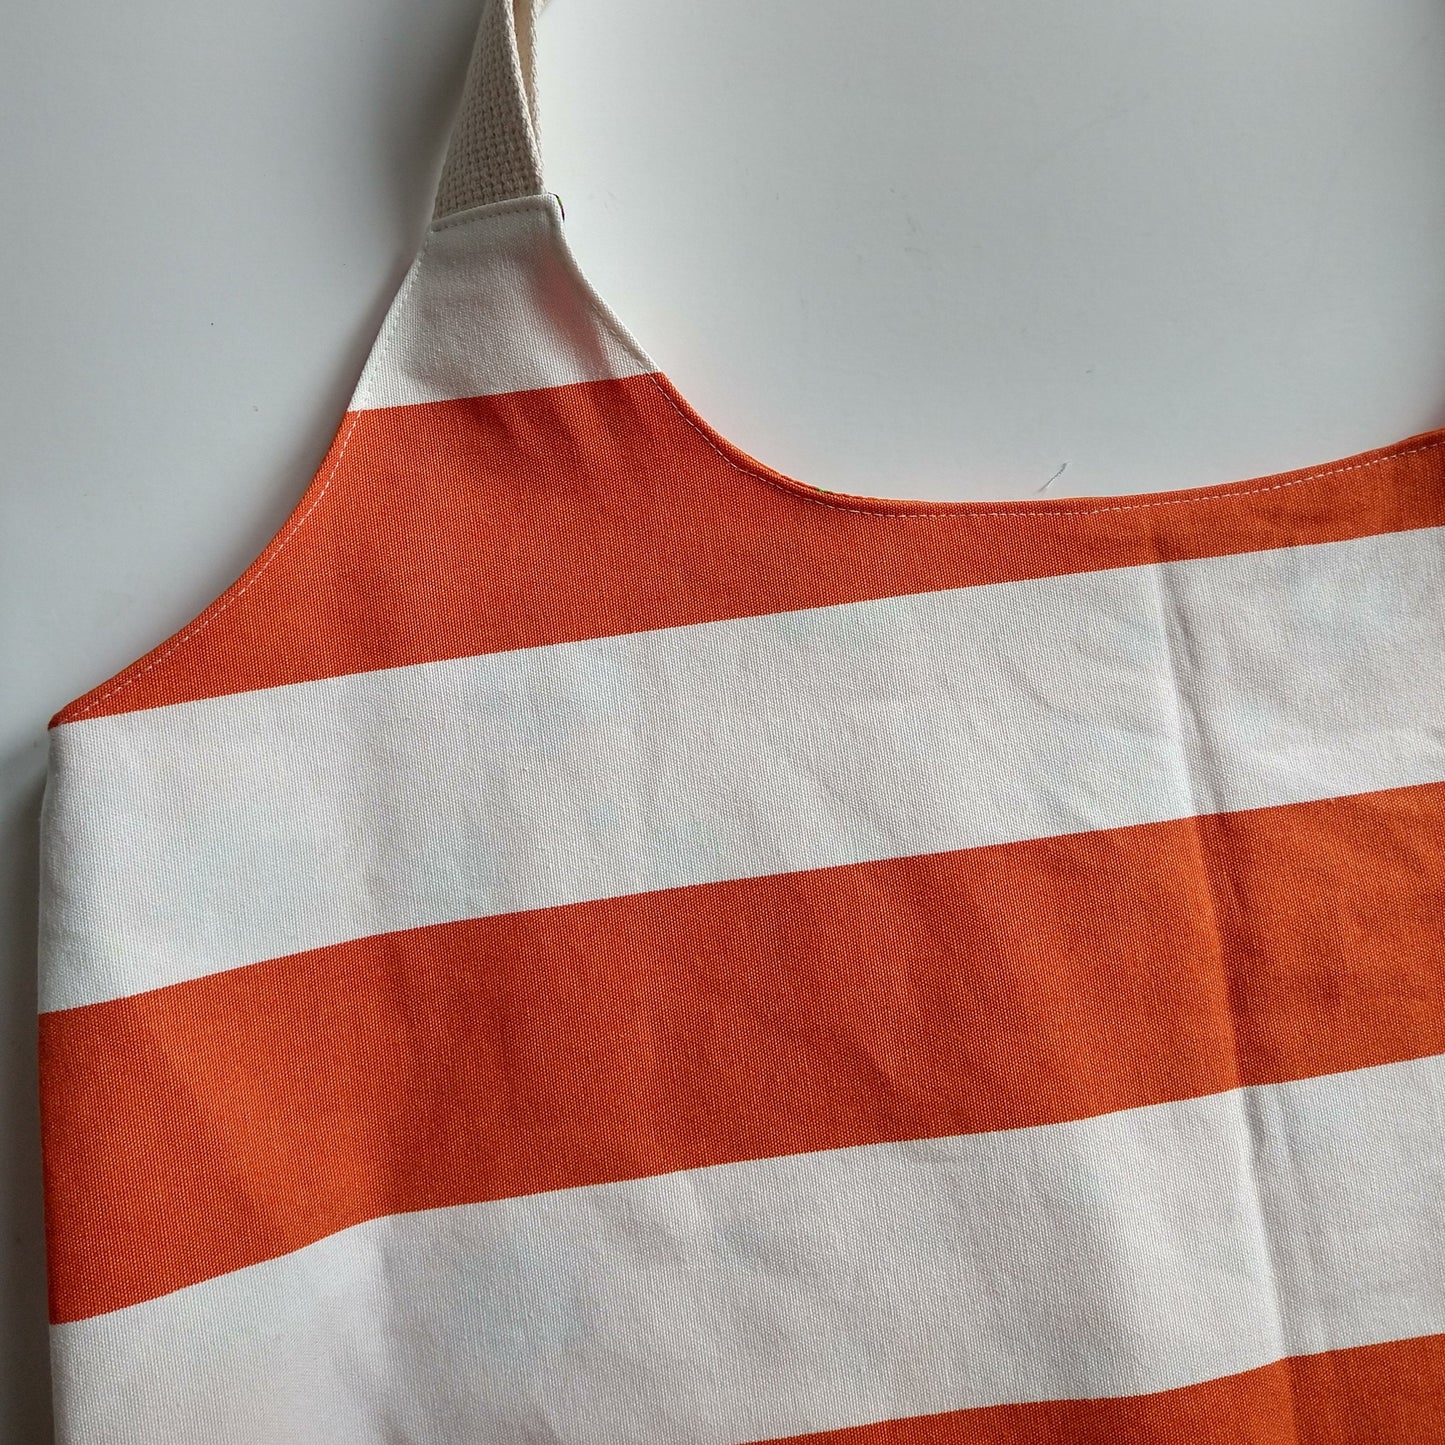 Shopping/beach bag, reversible, size large, orange stripes and flowers (Handmade in Canada)